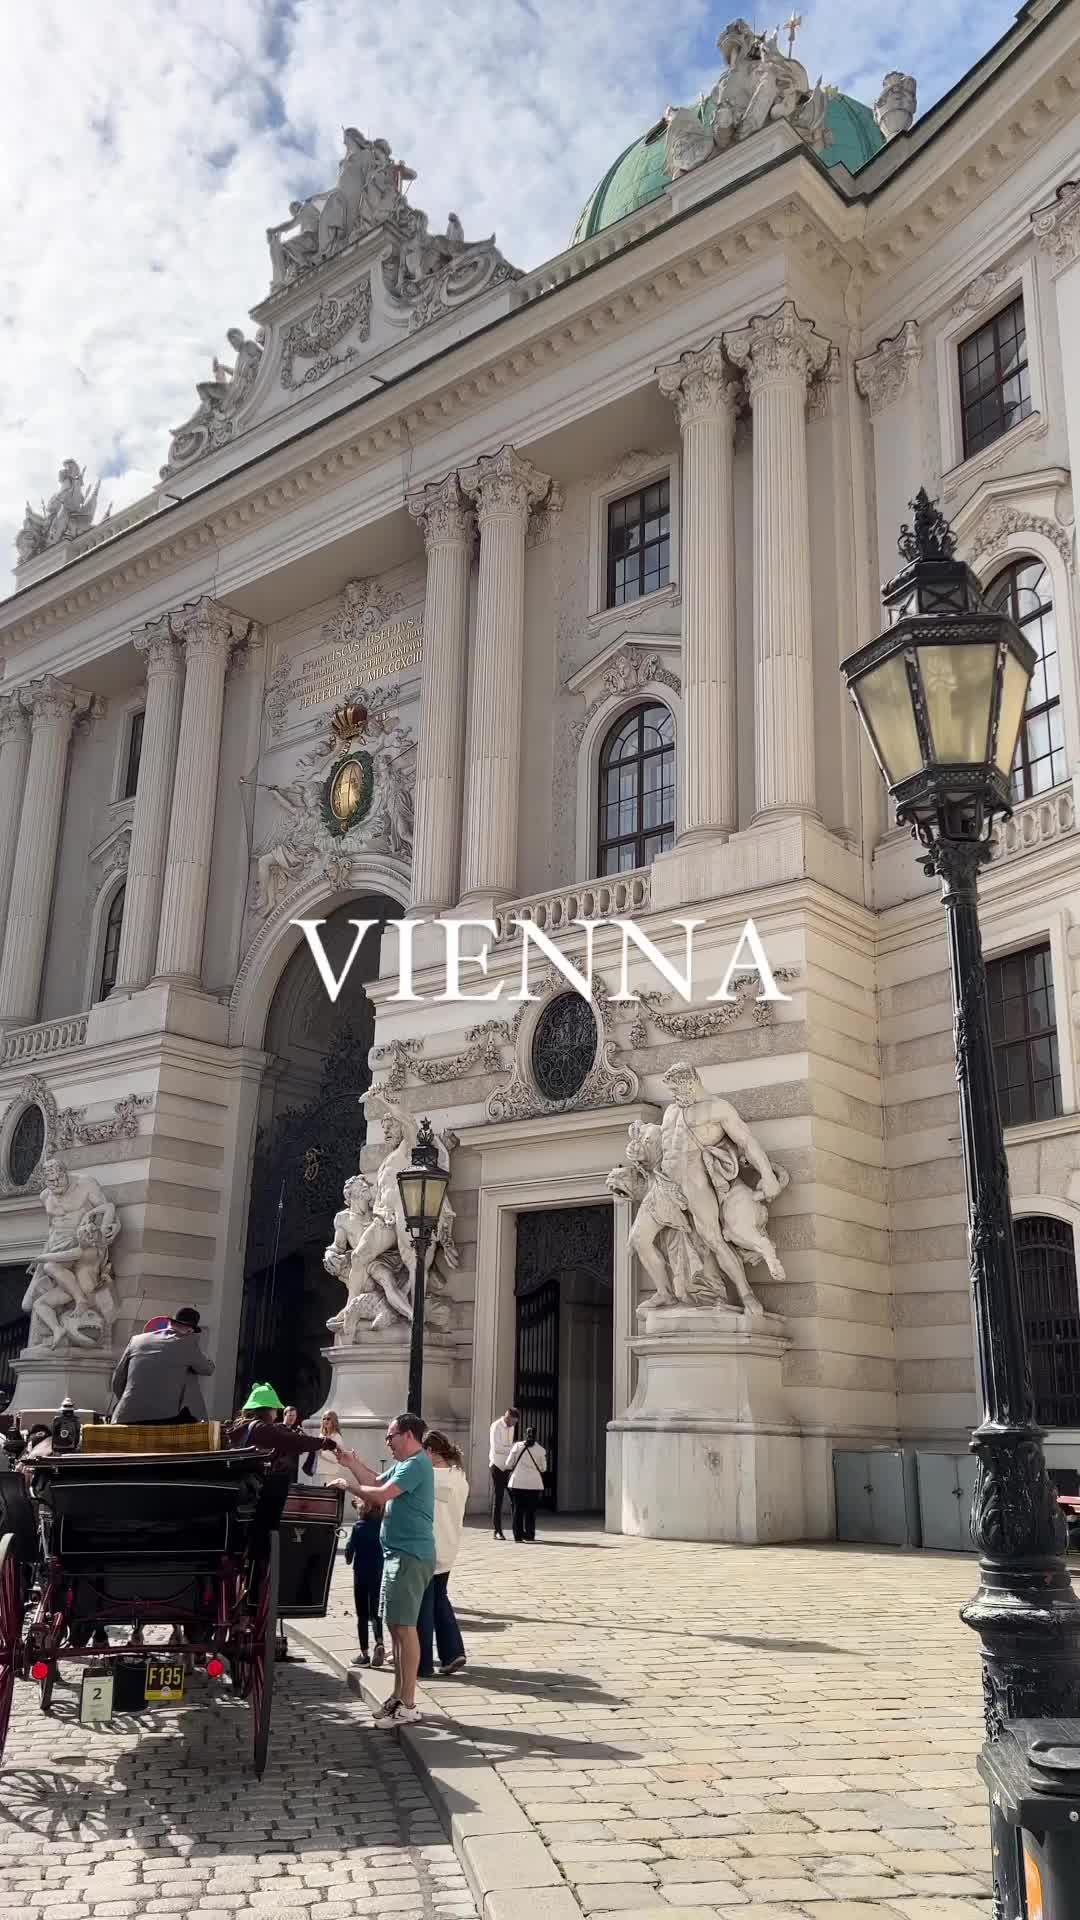 Honestly impressed by the amount of beautiful buildings in Vienna! There are so many parks too 😍
Can’t wait to see more in the next few days. Definitely sharing some advice in the next few videos, so make sure to follow ❤️

#vienna #wien #visitvienna #viennanow #viennaaustria #viennagram #wienstagram #wien #beautifuldestinations #travellingthroughtheworld #passionpassport #österreich #austria #austria🇦🇹 #austriavacations #austriagram #viennacity